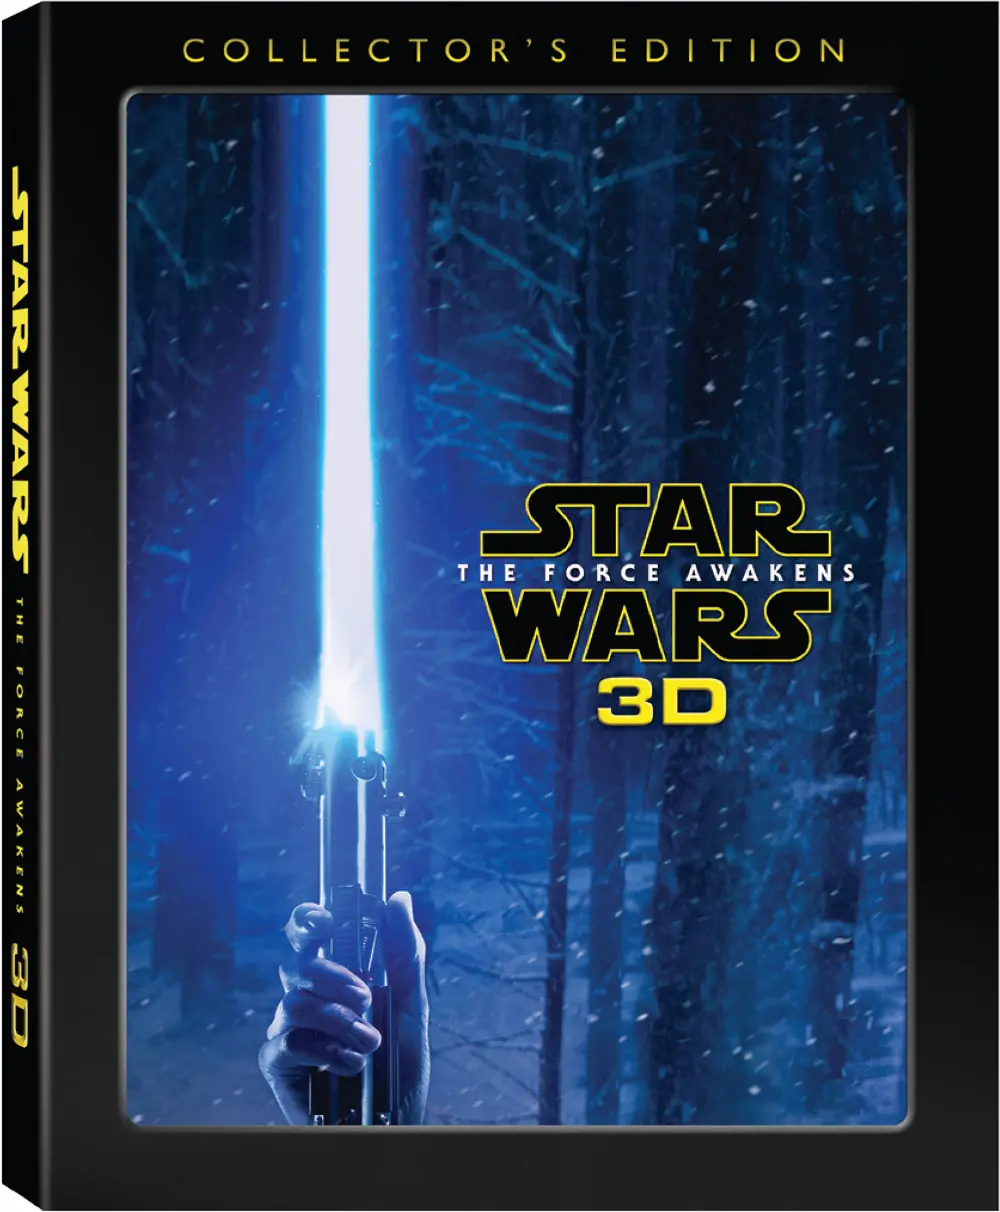 Star Wars: The Force Awakens 3D Collector's Edition-1